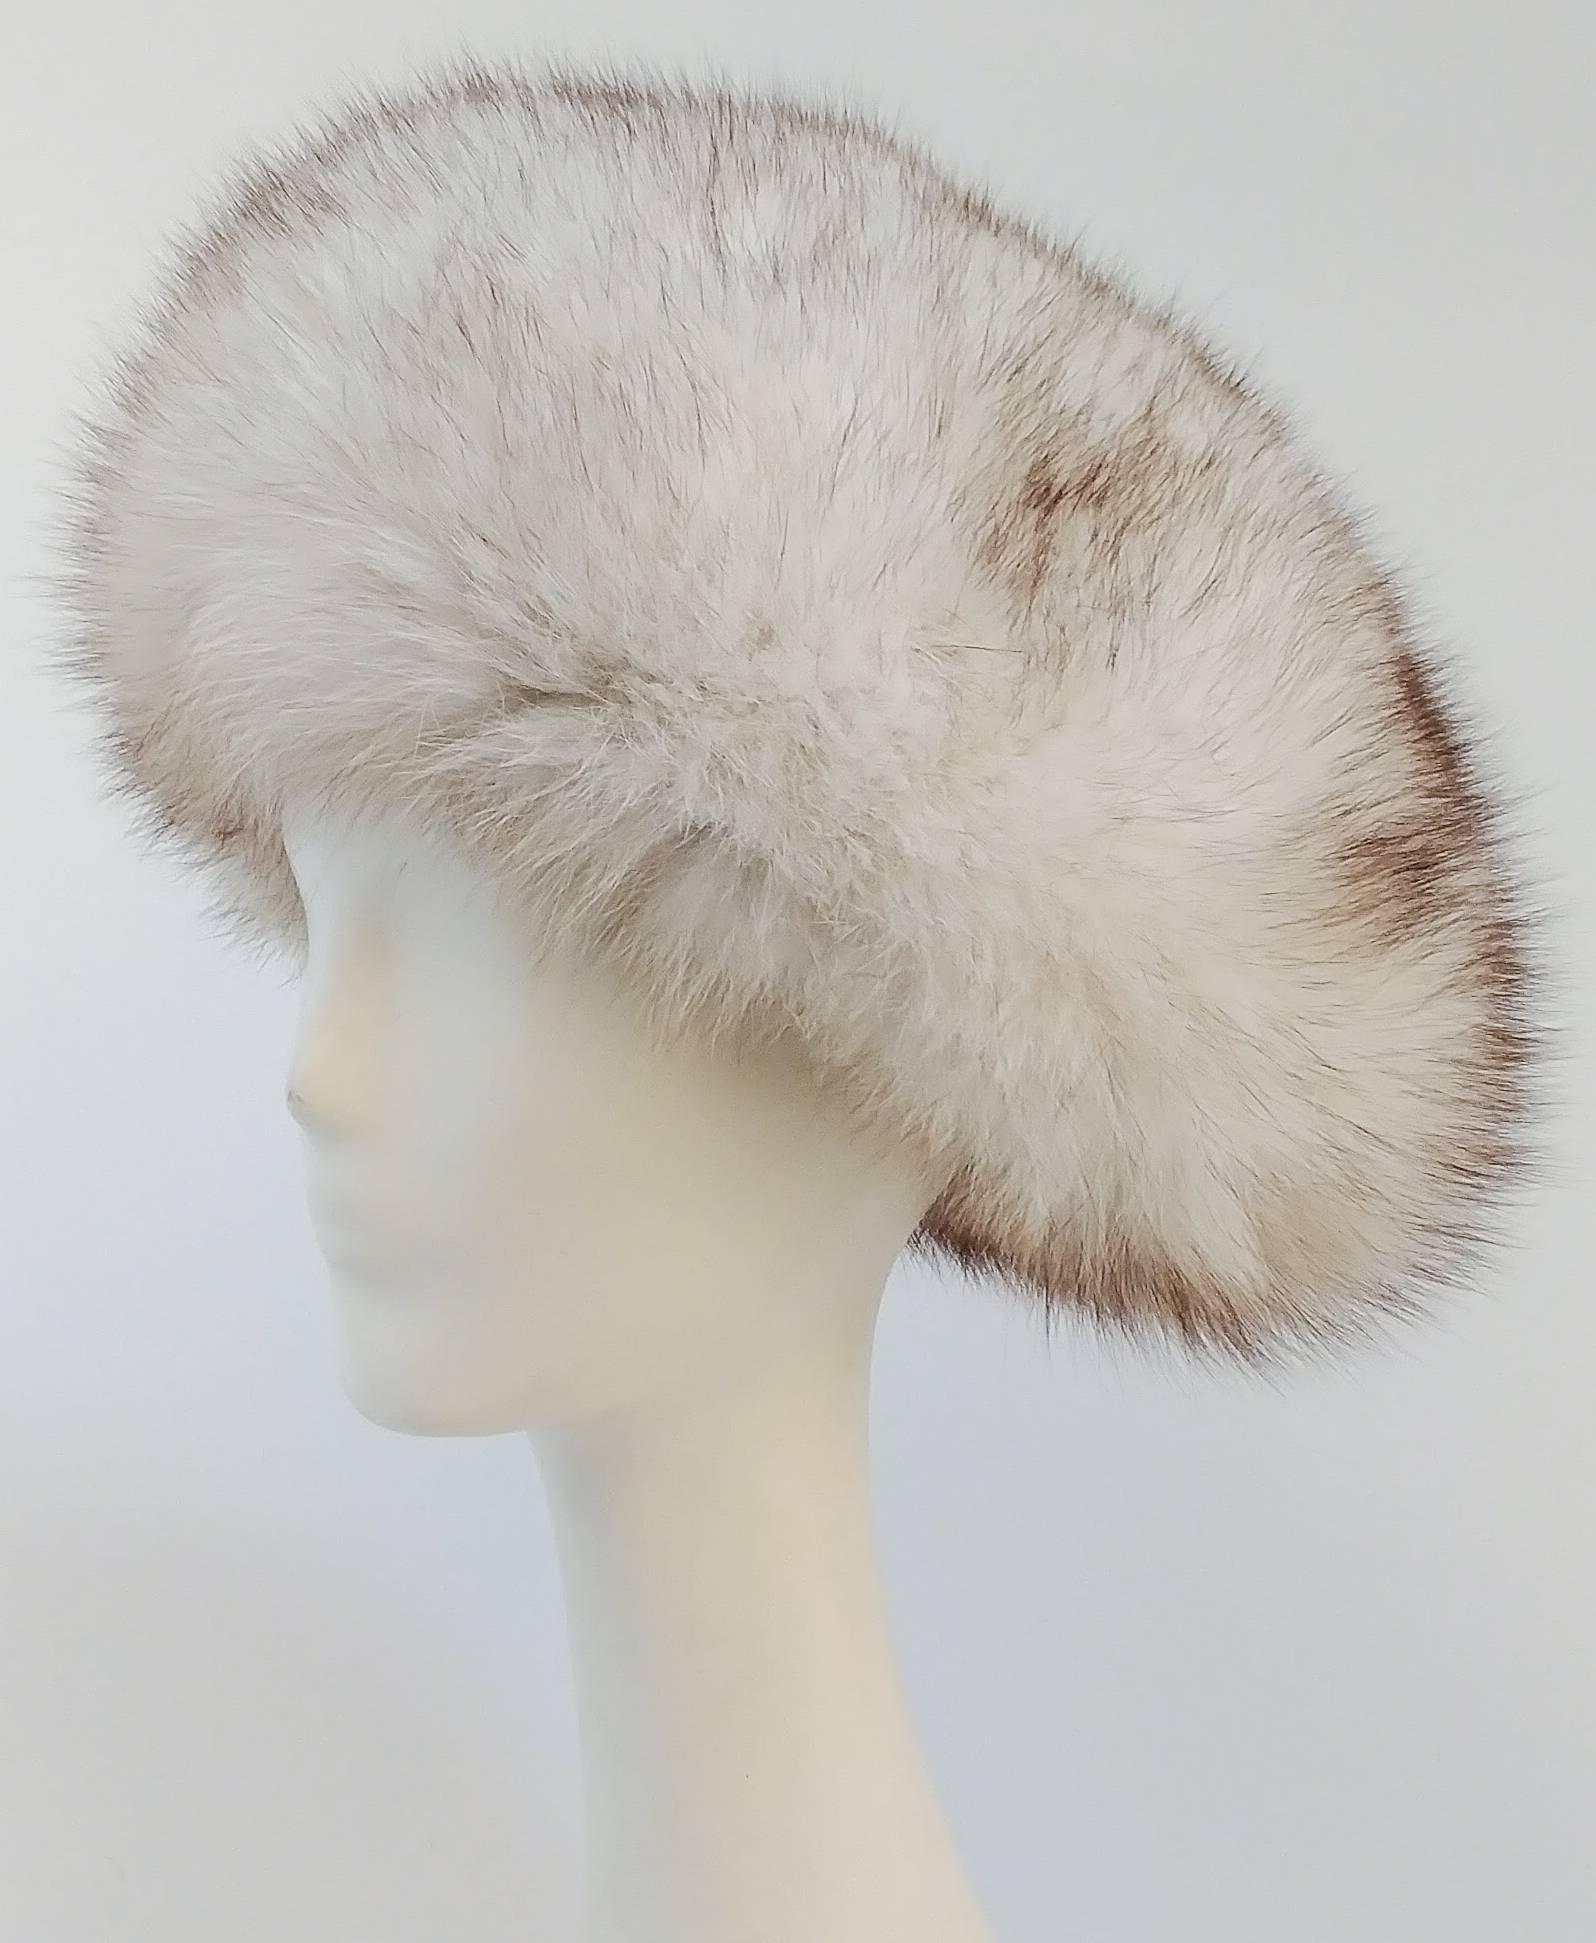 60s Adolfo II White Fox Fur Hat. Sold at Saks Fifth Avenue. Satin lined with grosgrain ribbon. 21.5" circumference. Wear towards the back of your head for true 1960s flair! 